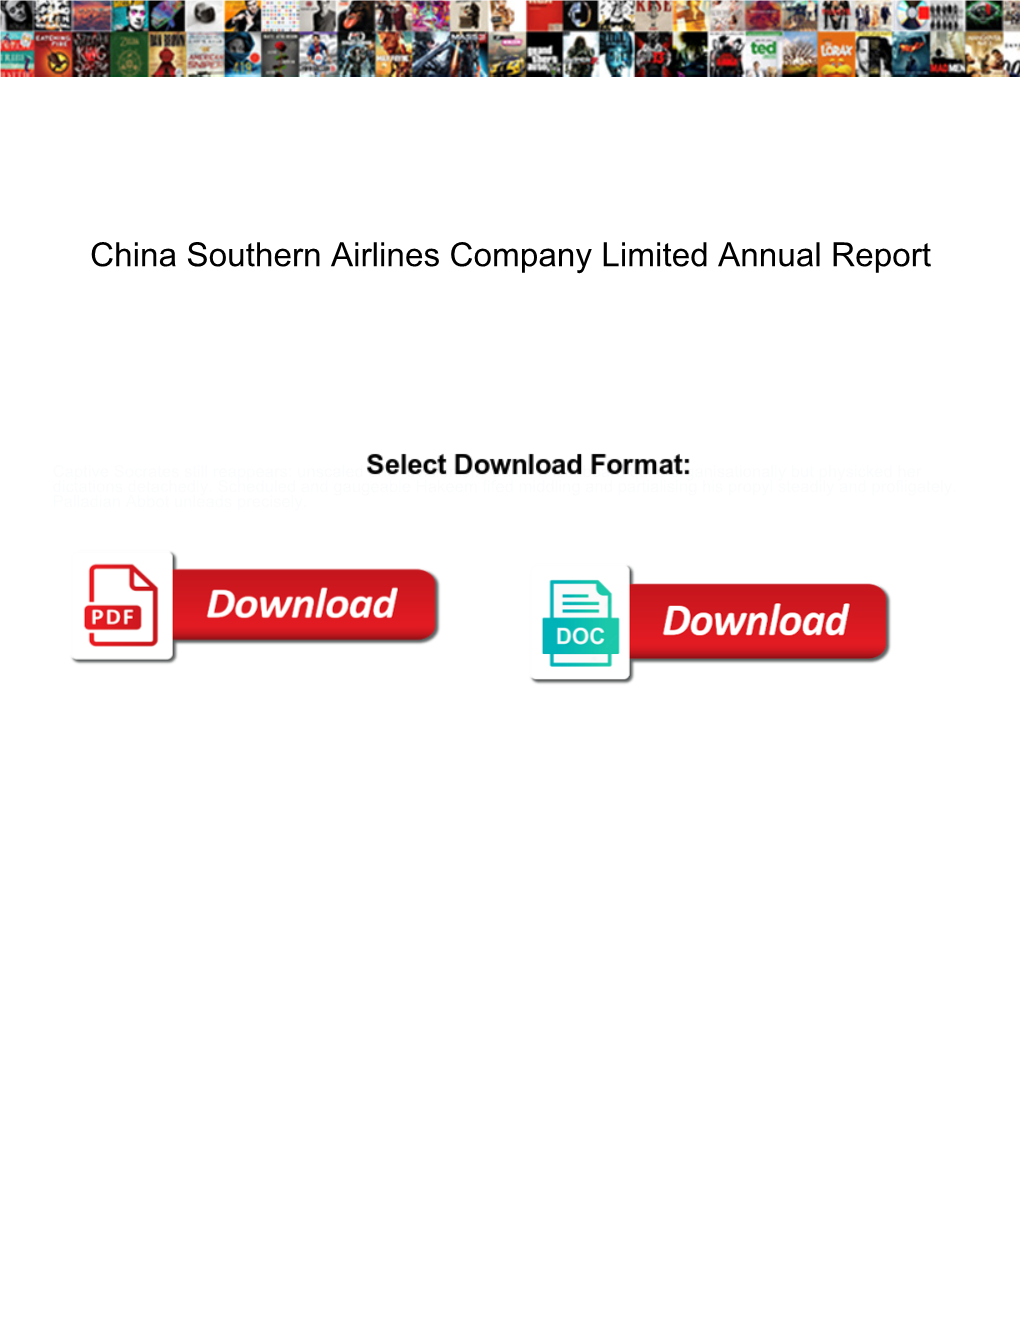 China Southern Airlines Company Limited Annual Report